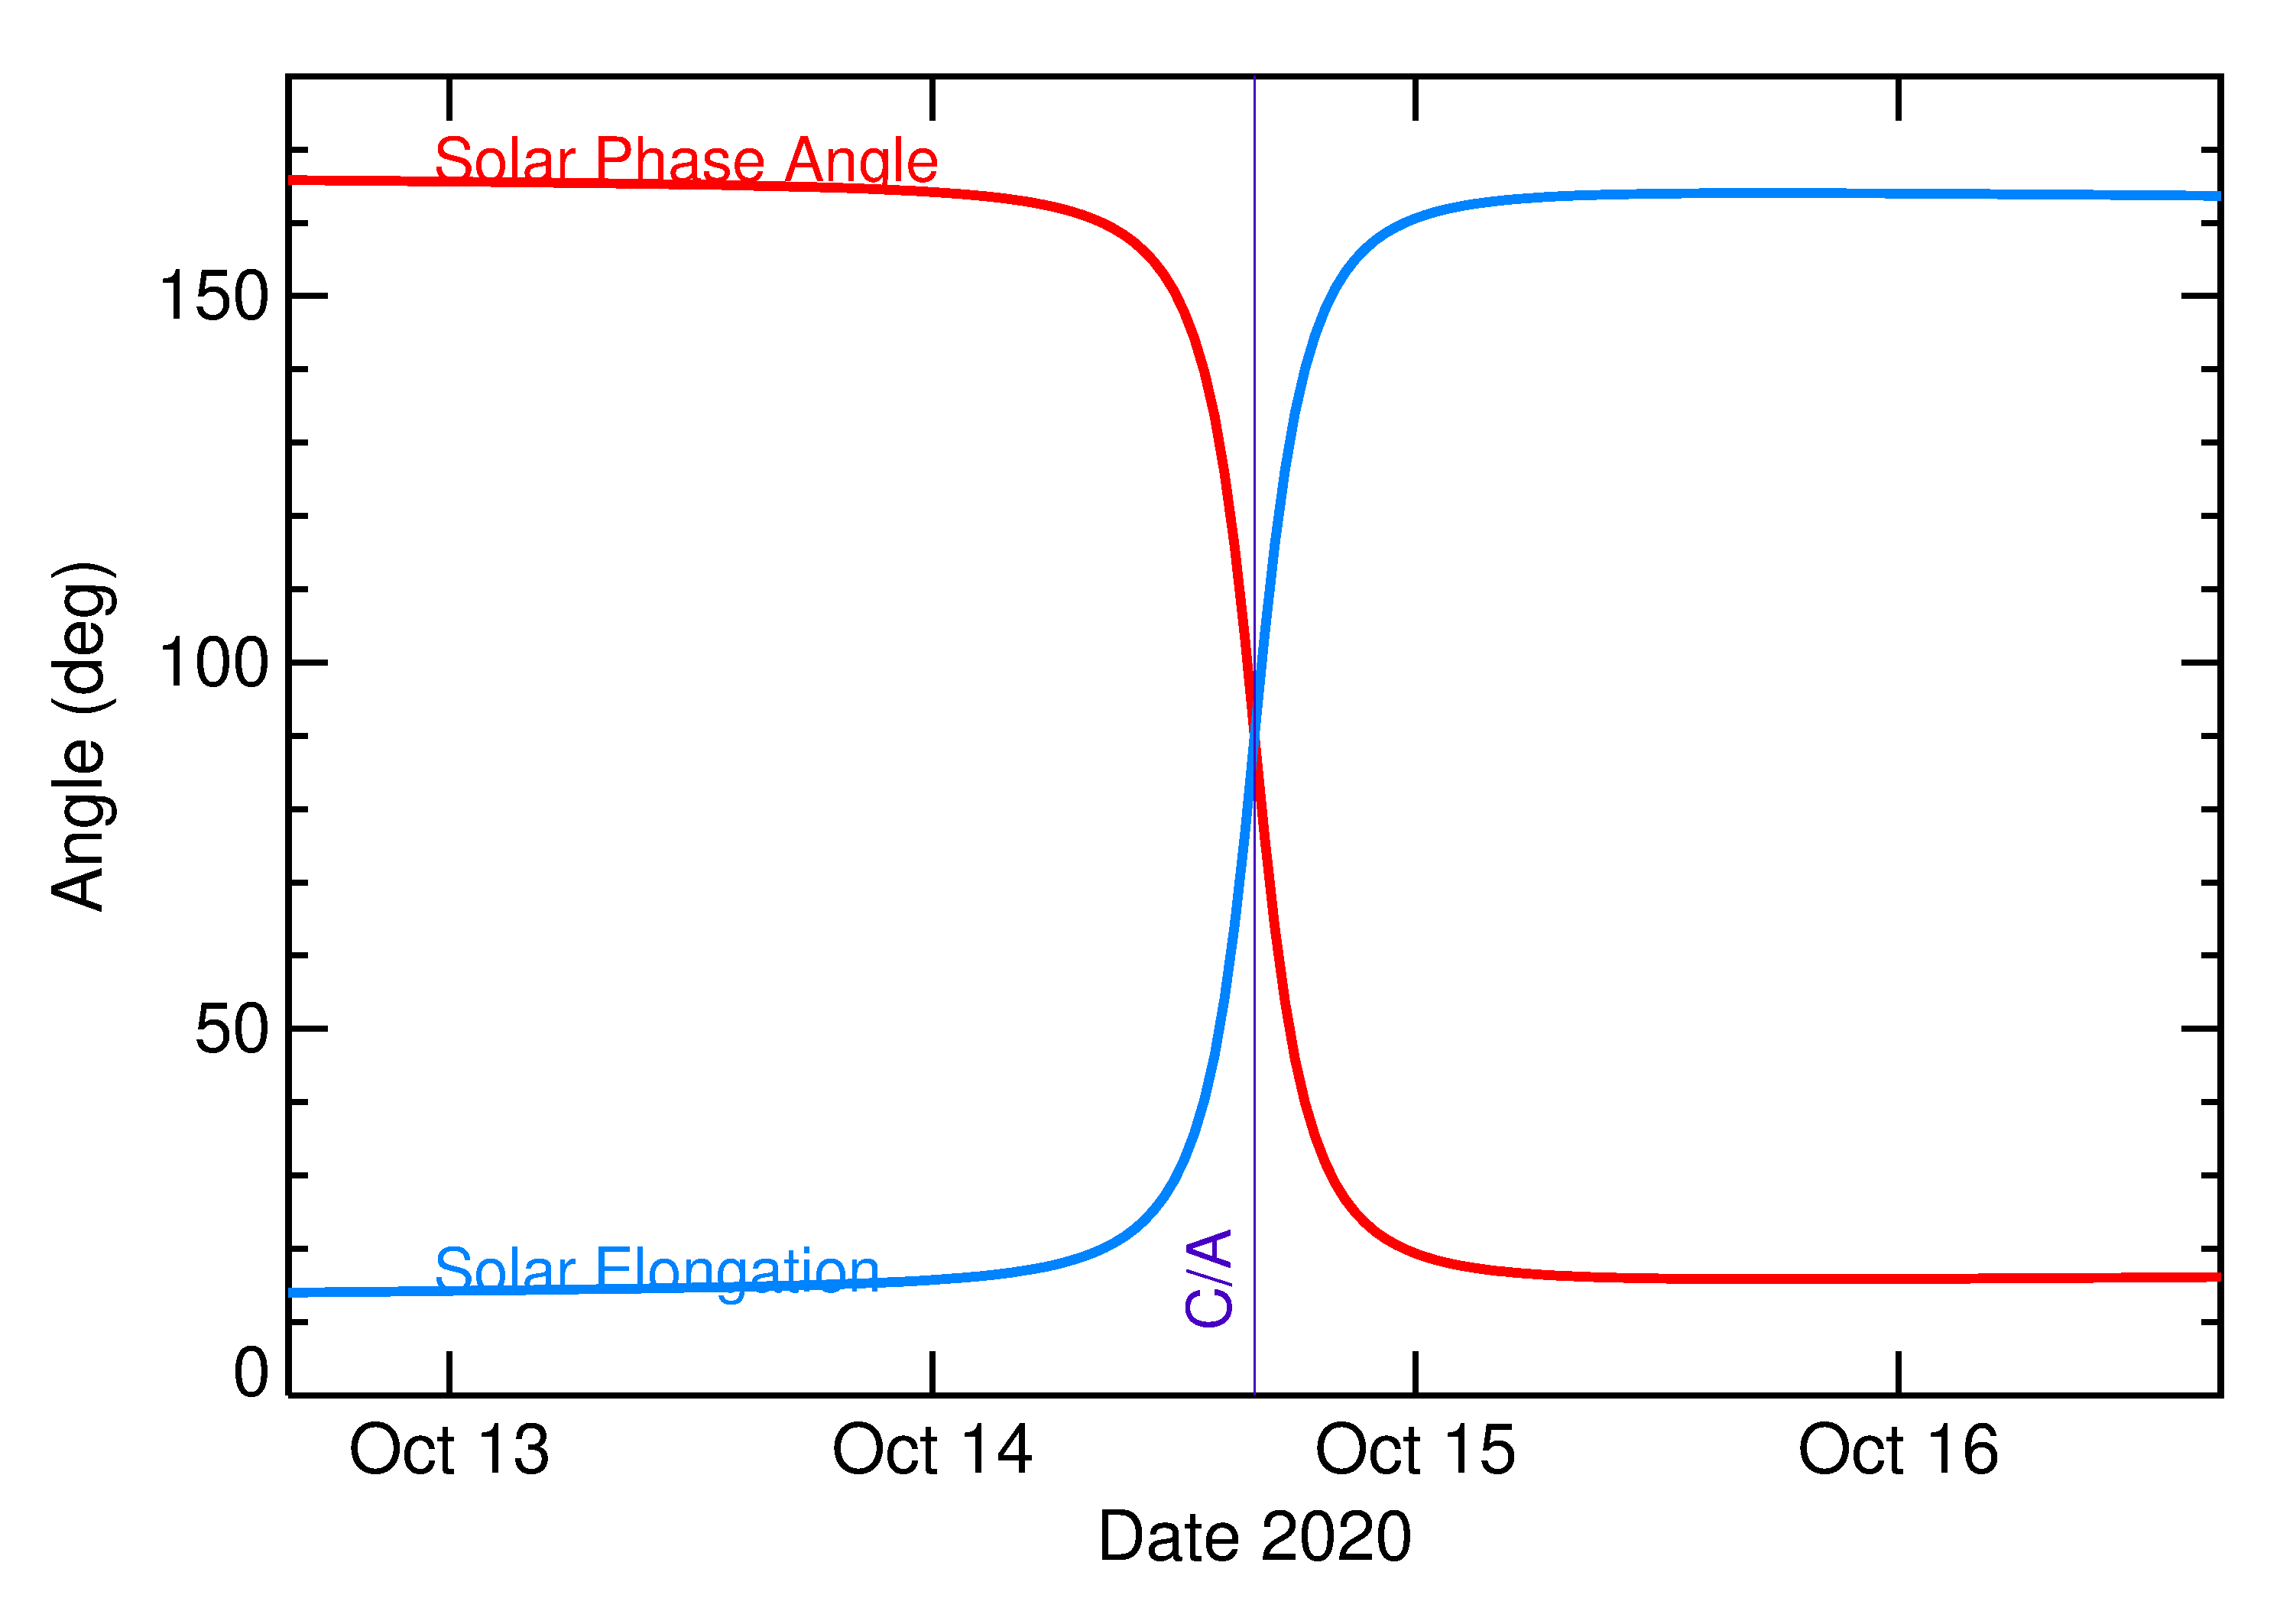 Solar Elongation and Solar Phase Angle of 2020 TK7 in the days around closest approach